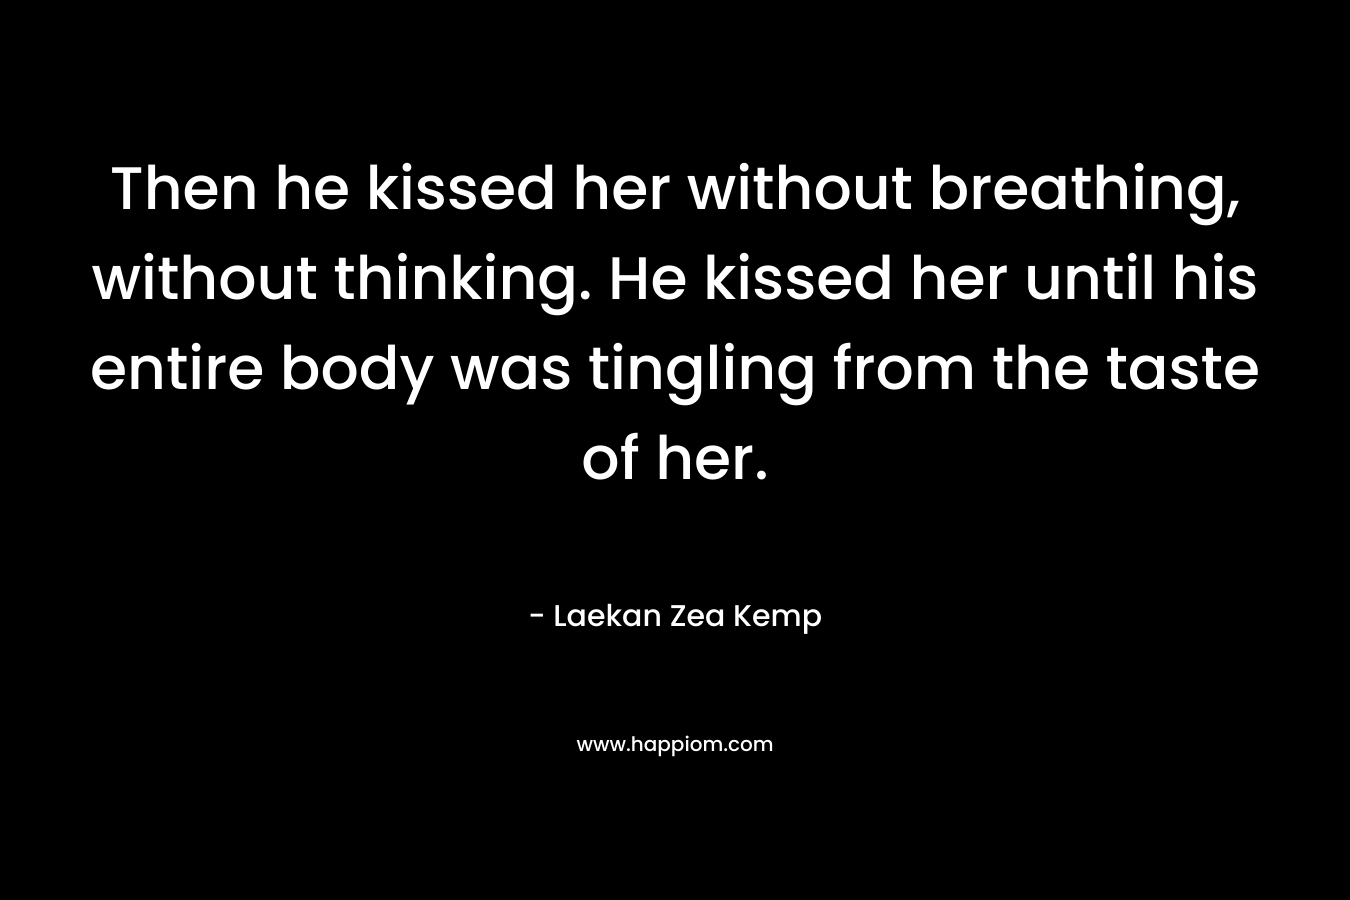 Then he kissed her without breathing, without thinking. He kissed her until his entire body was tingling from the taste of her.